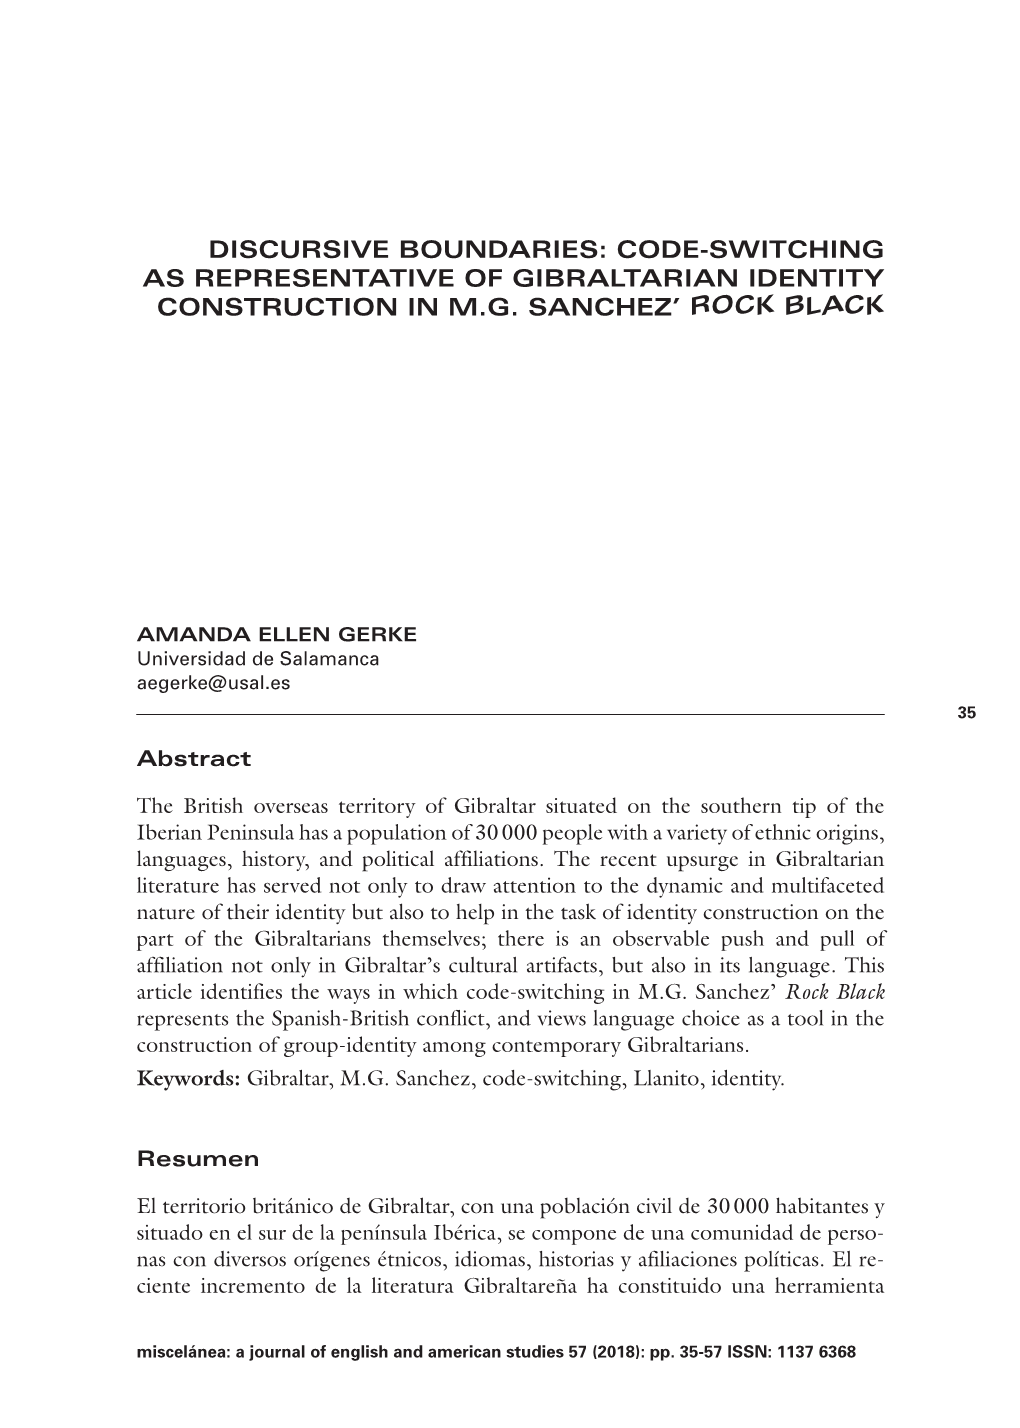 Code-Switching As Representative of Gibraltarian Identity Construction in M.G